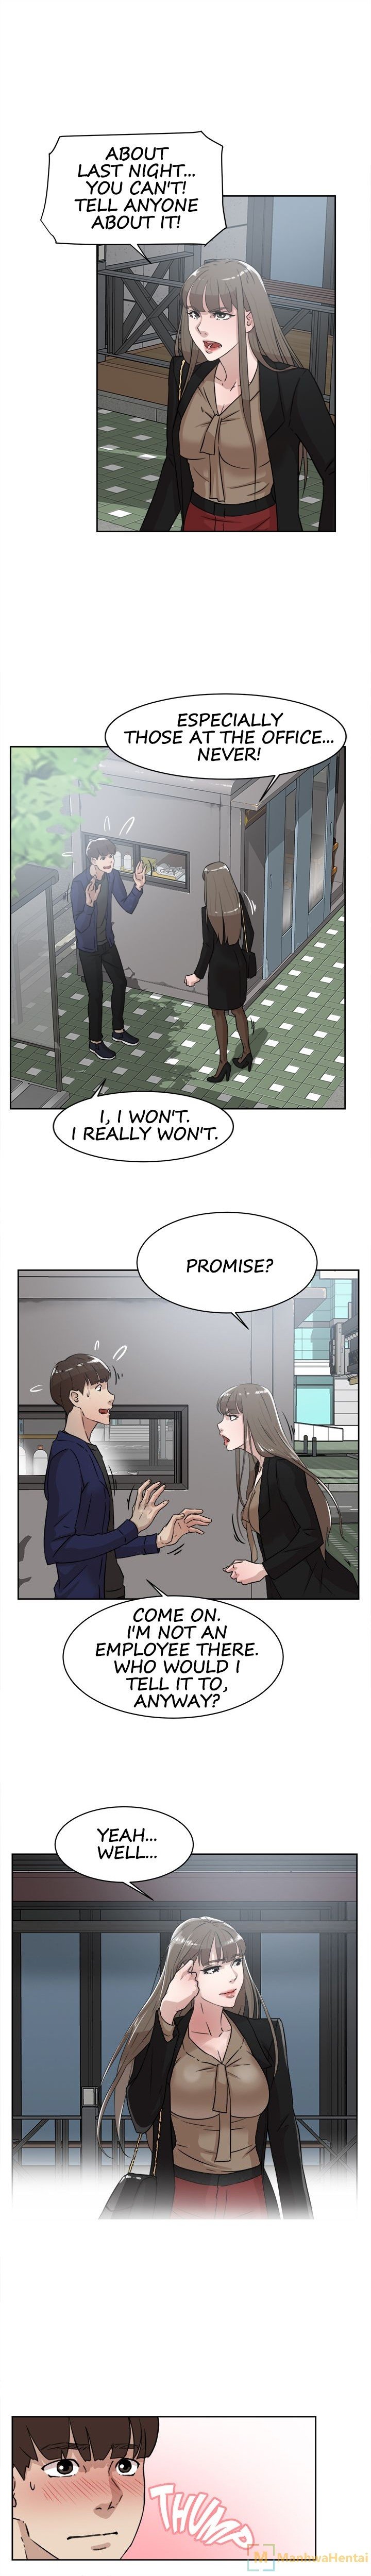 office-affairs-chap-33-12